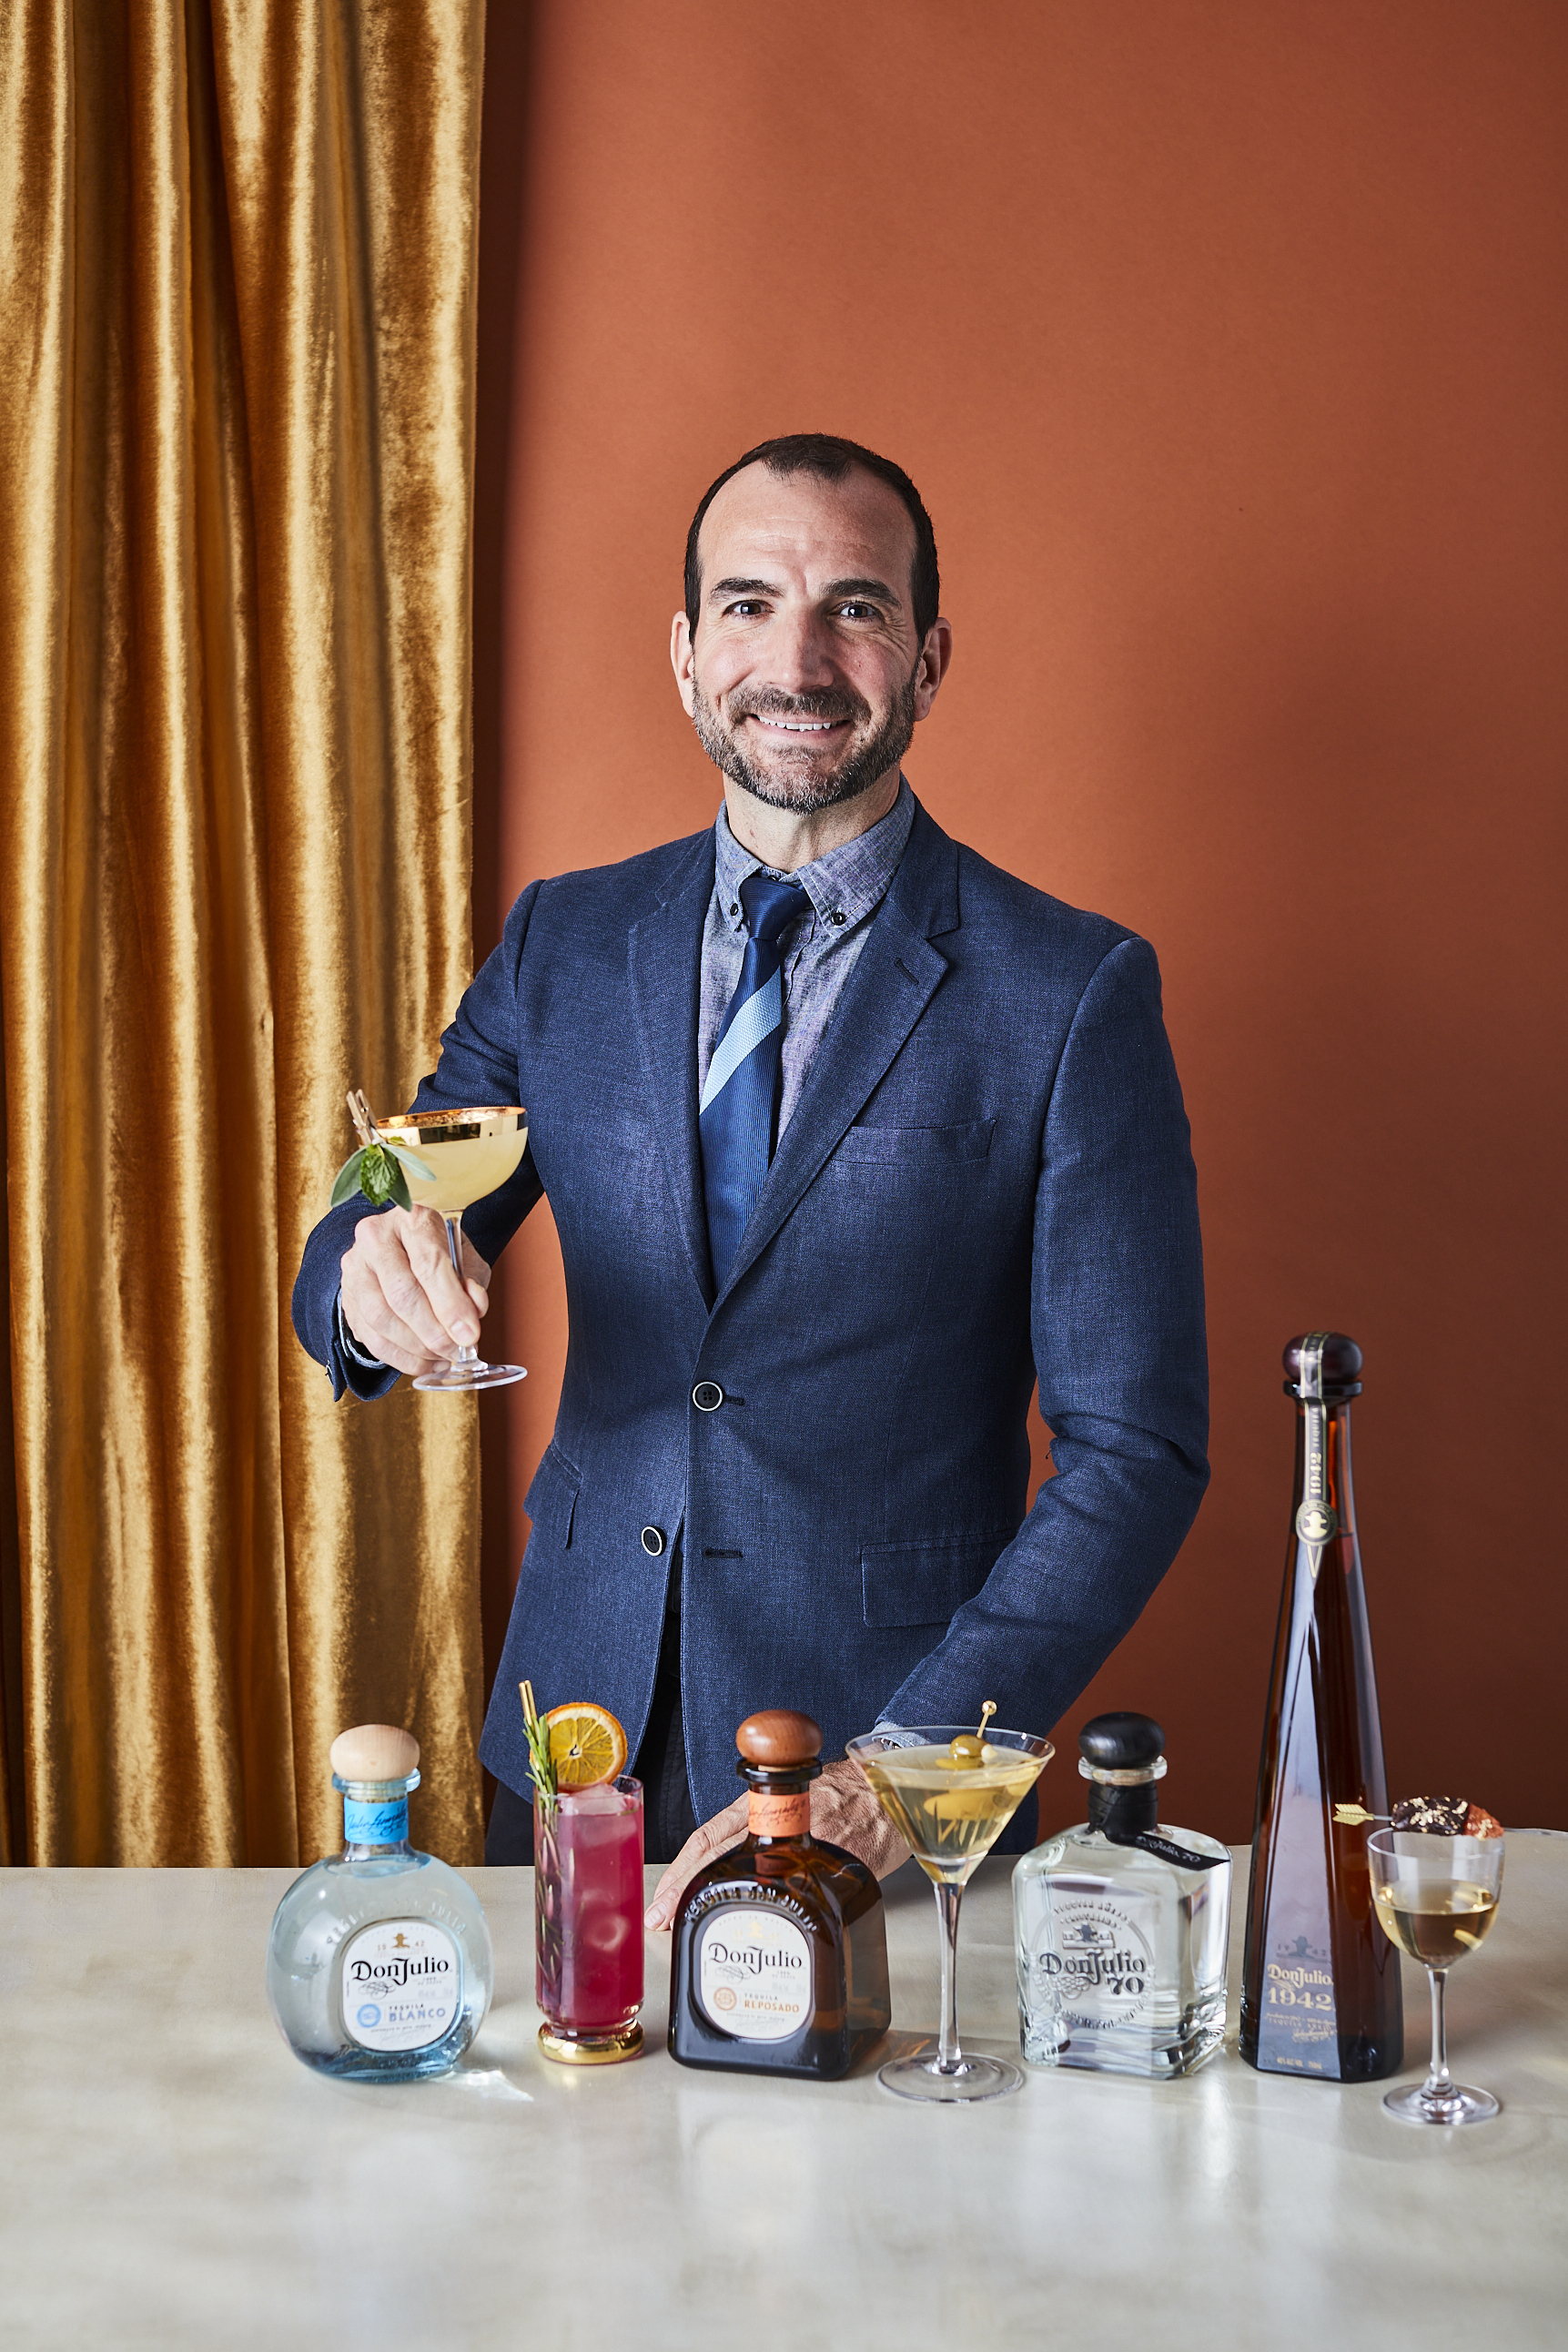 TEQUILA DON JULIO CELEBRATES HOLLYWOOD'S BIGGEST NIGHT WITH OSCAR®-WORTHY COCKTAILS CRAFTED BY AWARD-WINNING MIXOLOGIST CHARLES JOLY